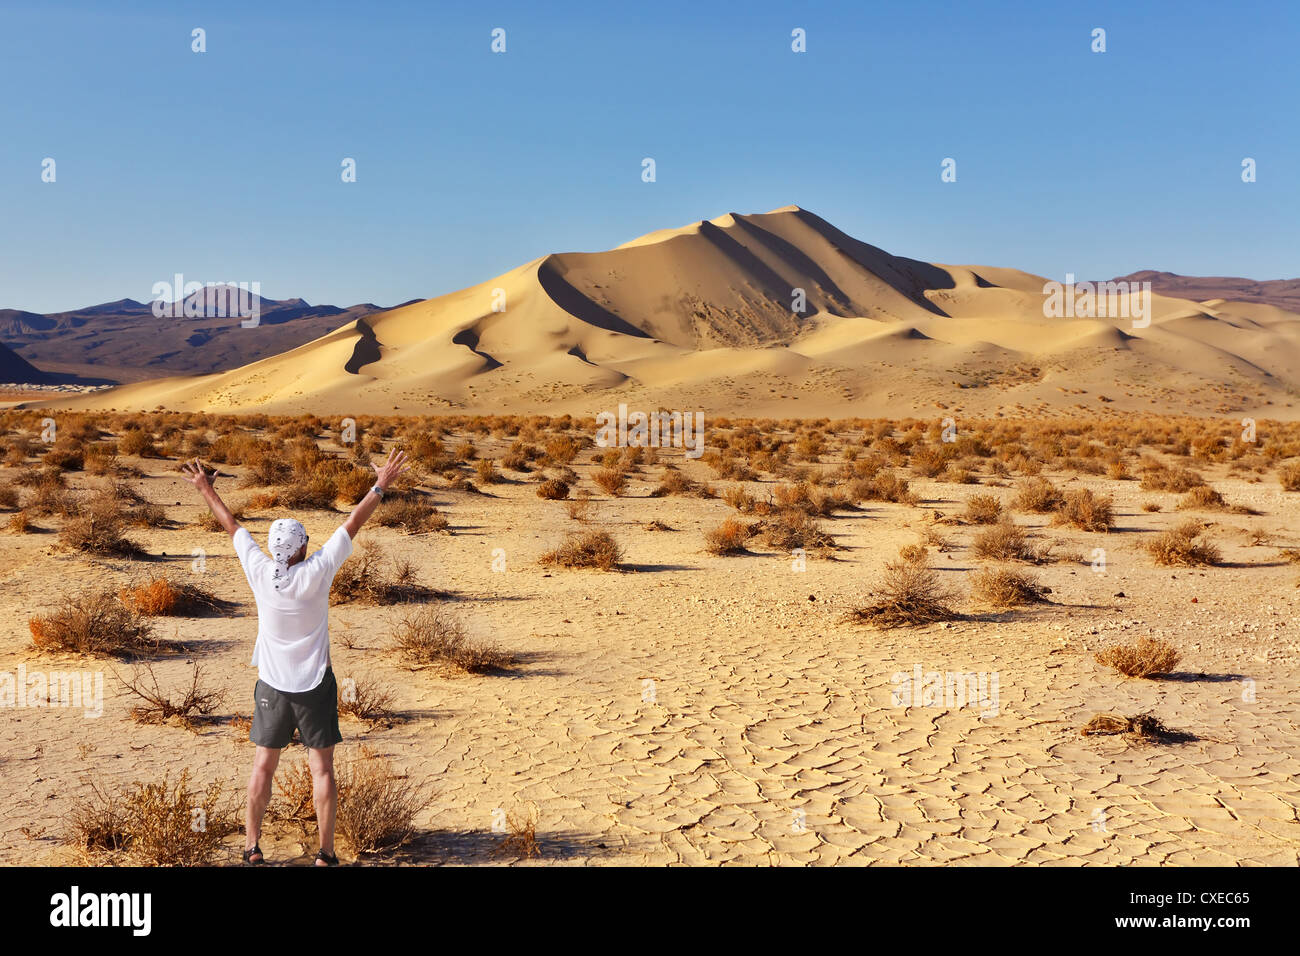 The sandy dune in Dead Walley Stock Photo